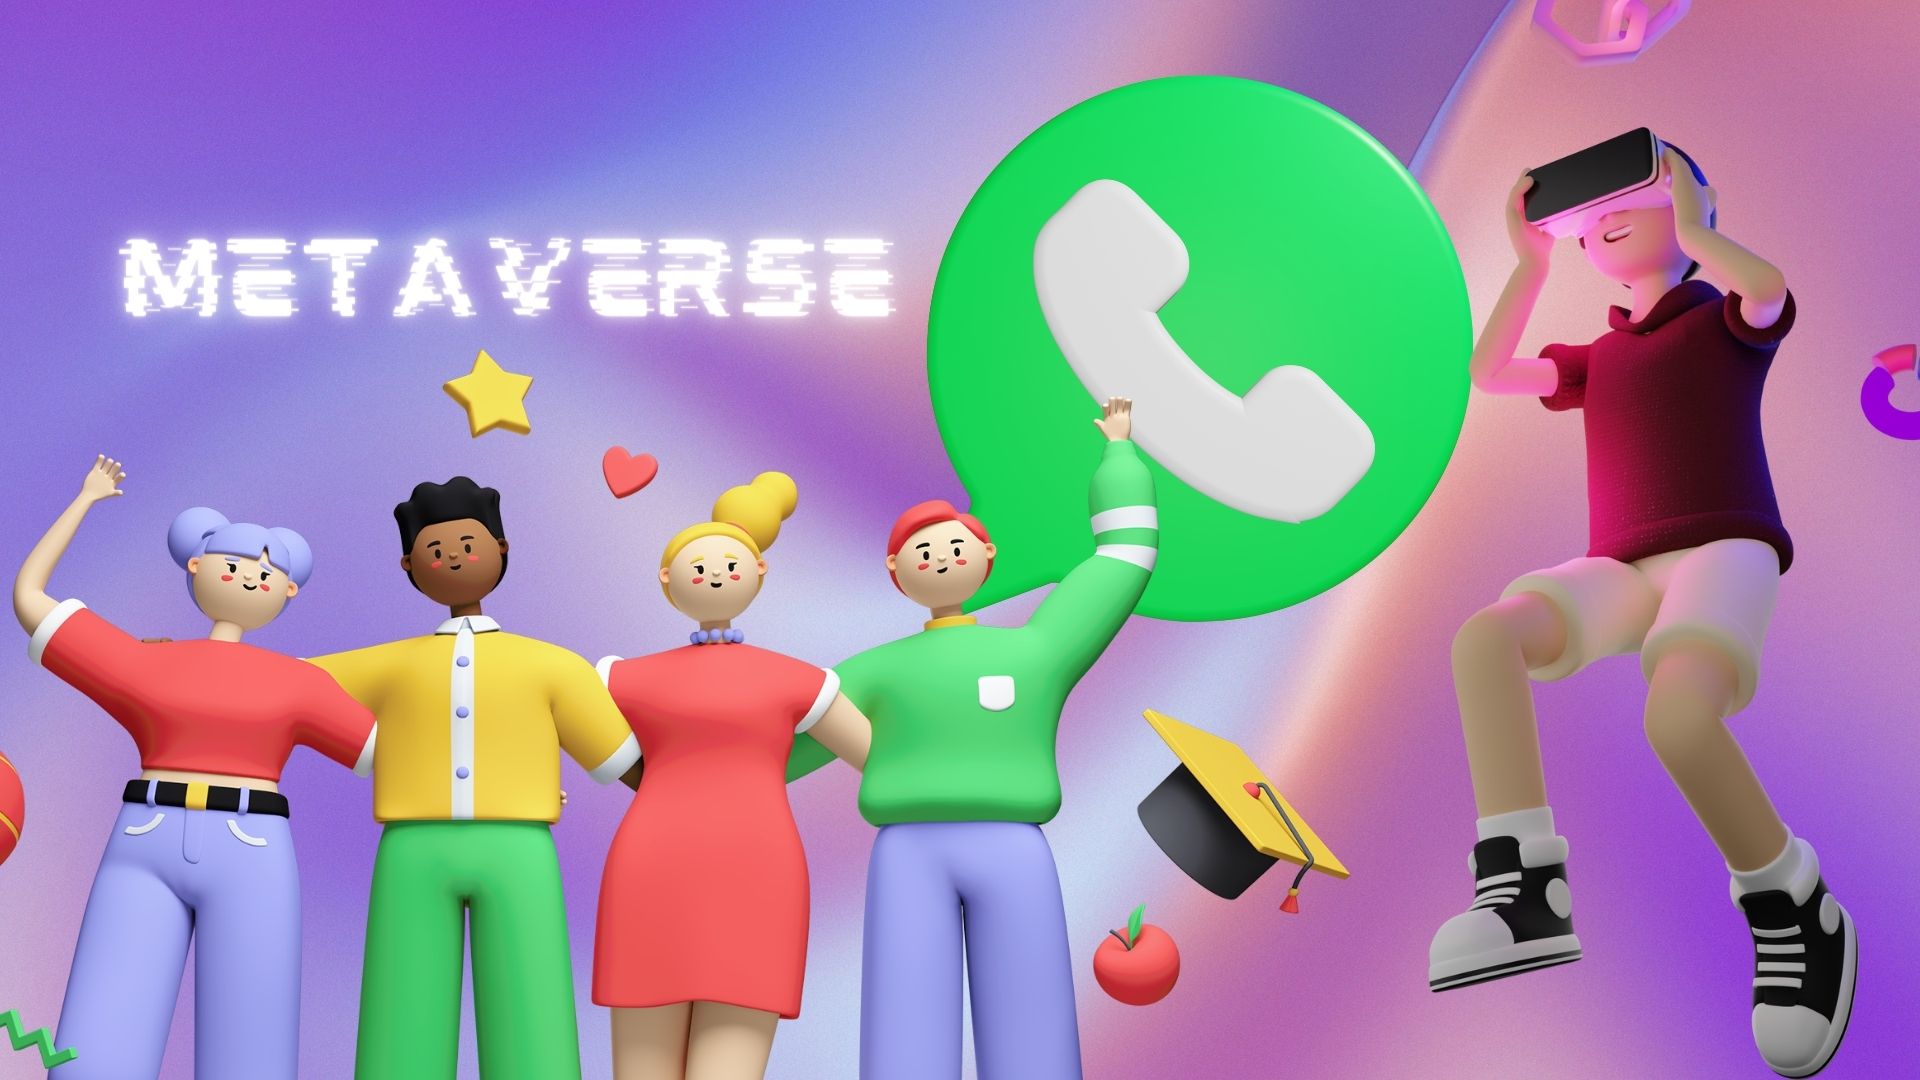 WhatsApp Takes a Step into the Metaverse with Meta Quest Integration